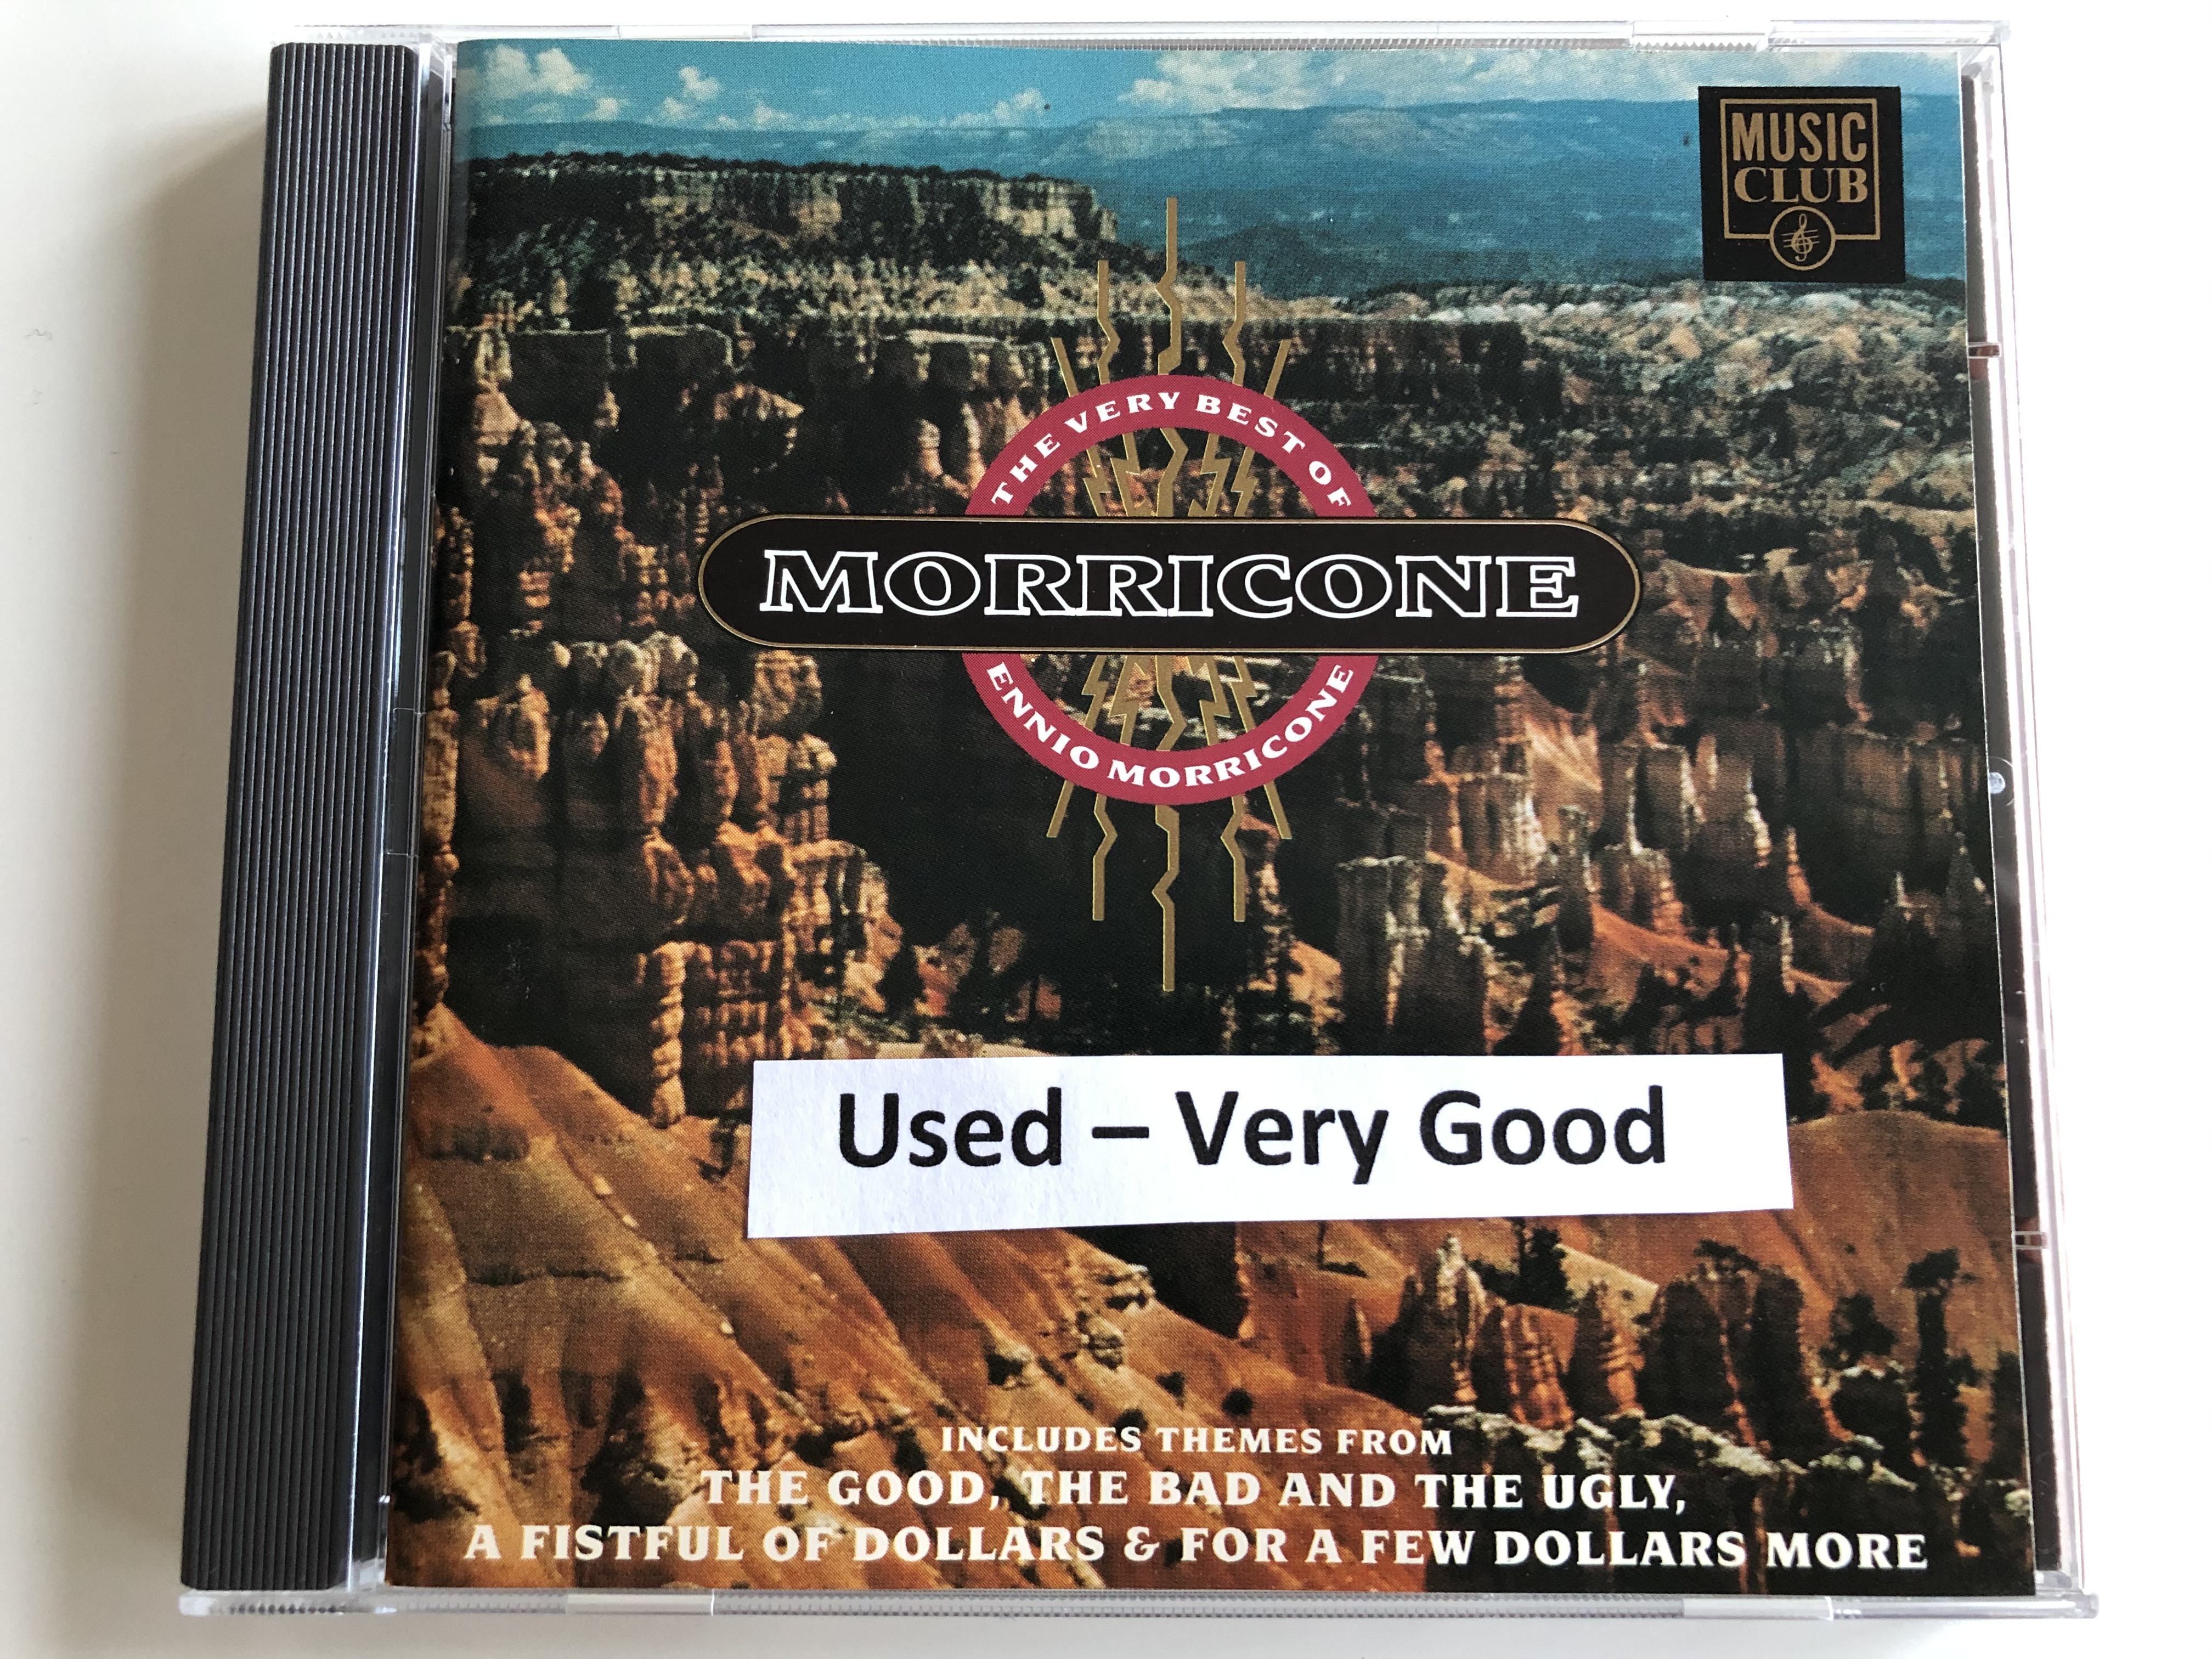 the-very-best-of-ennio-morricone-includes-themes-from-the-good-the-bad-and-the-ugly-a-fistful-of-dollars-for-a-few-dollars-more-music-club-audio-cd-1992-mccd-056-2-.jpg